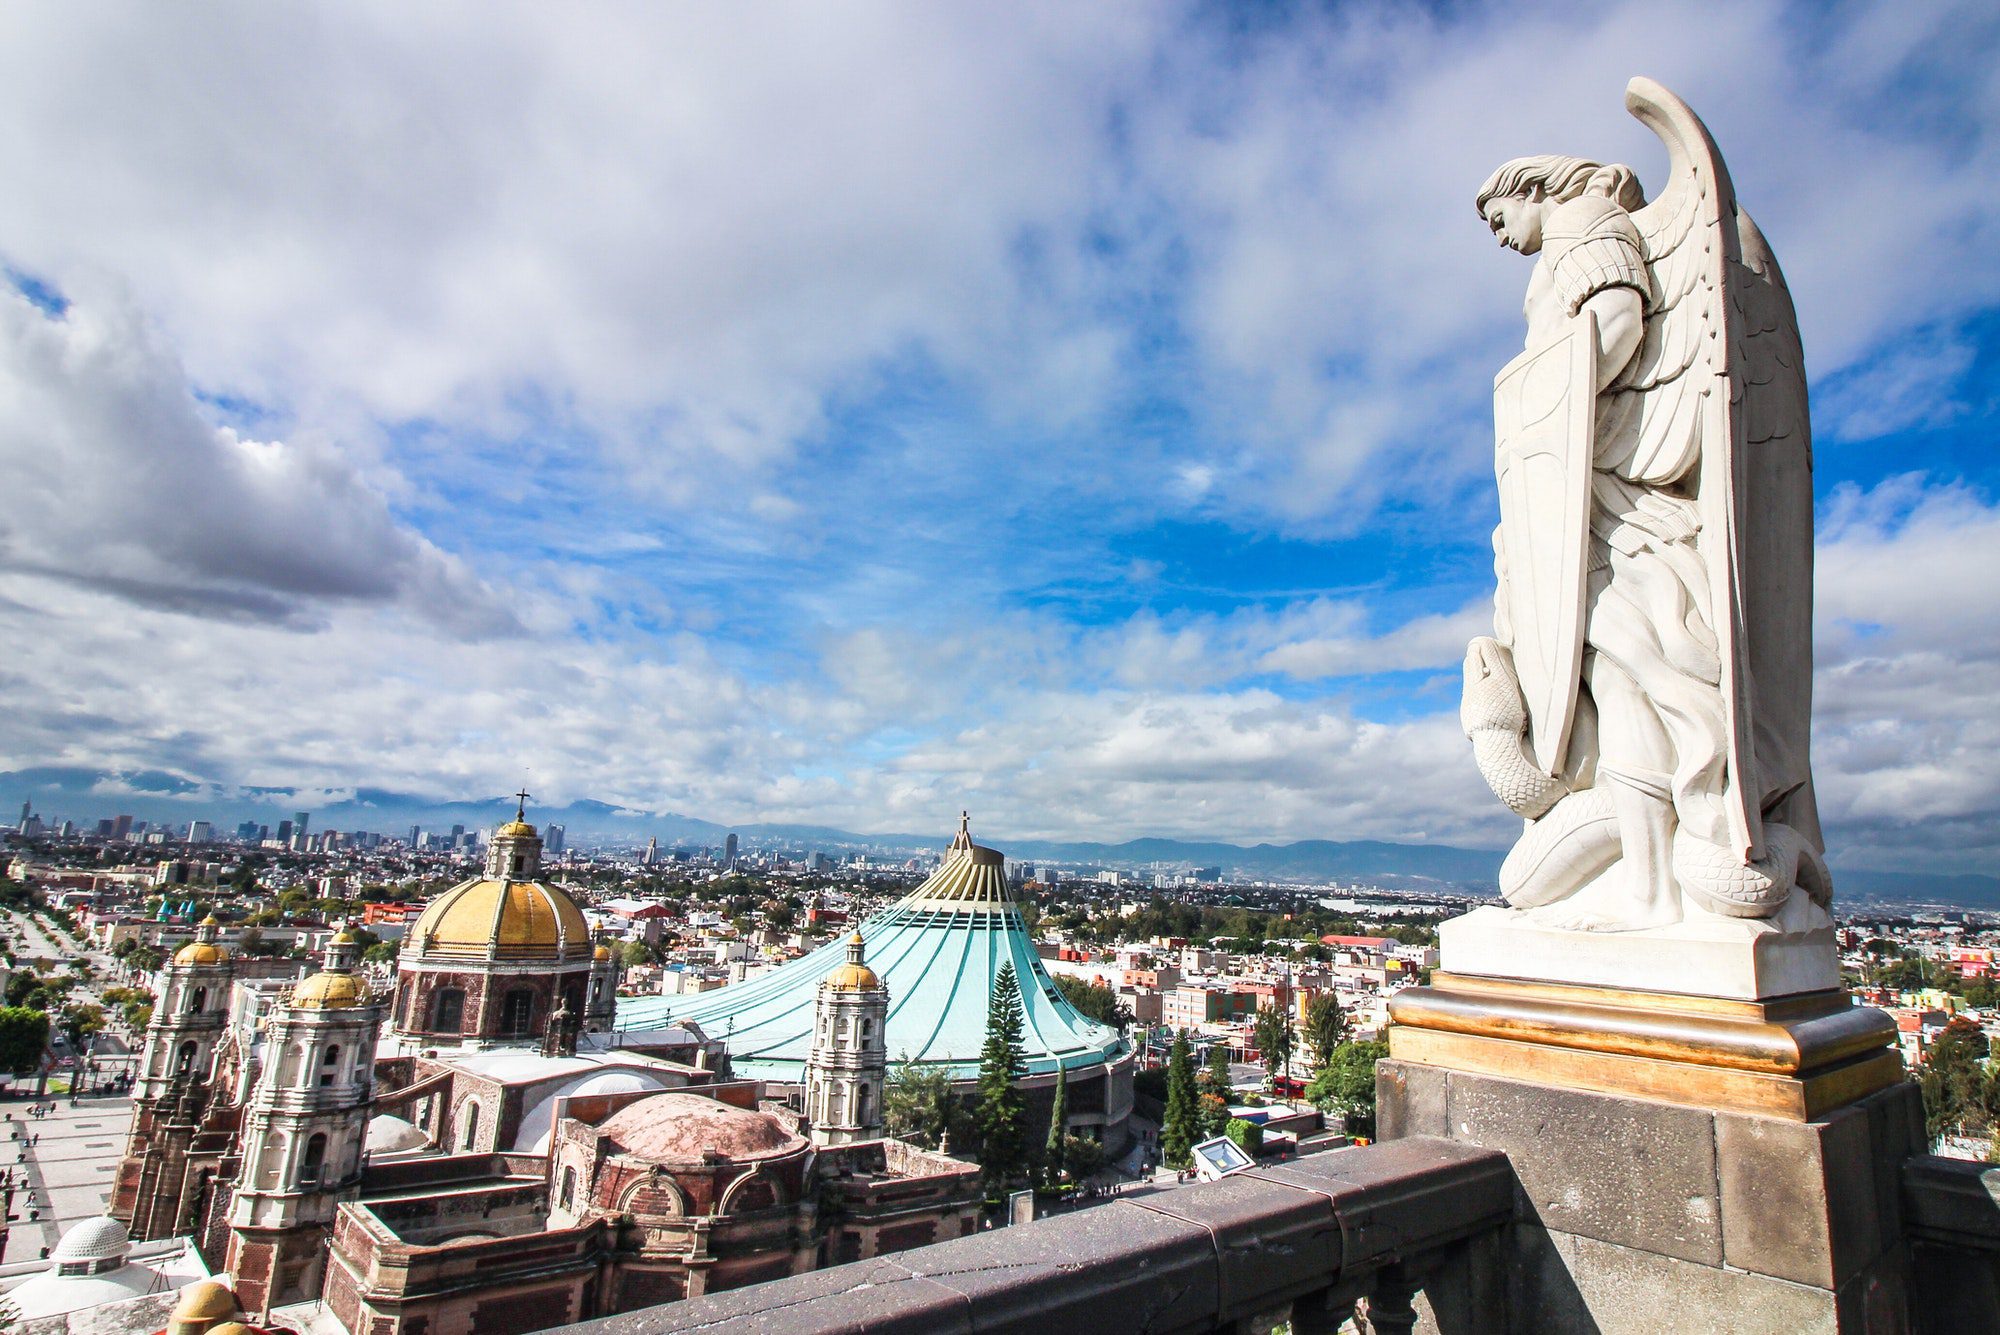 St Michael the archangel statue overlooking the Basílica de Guadalupe in Mexico City.